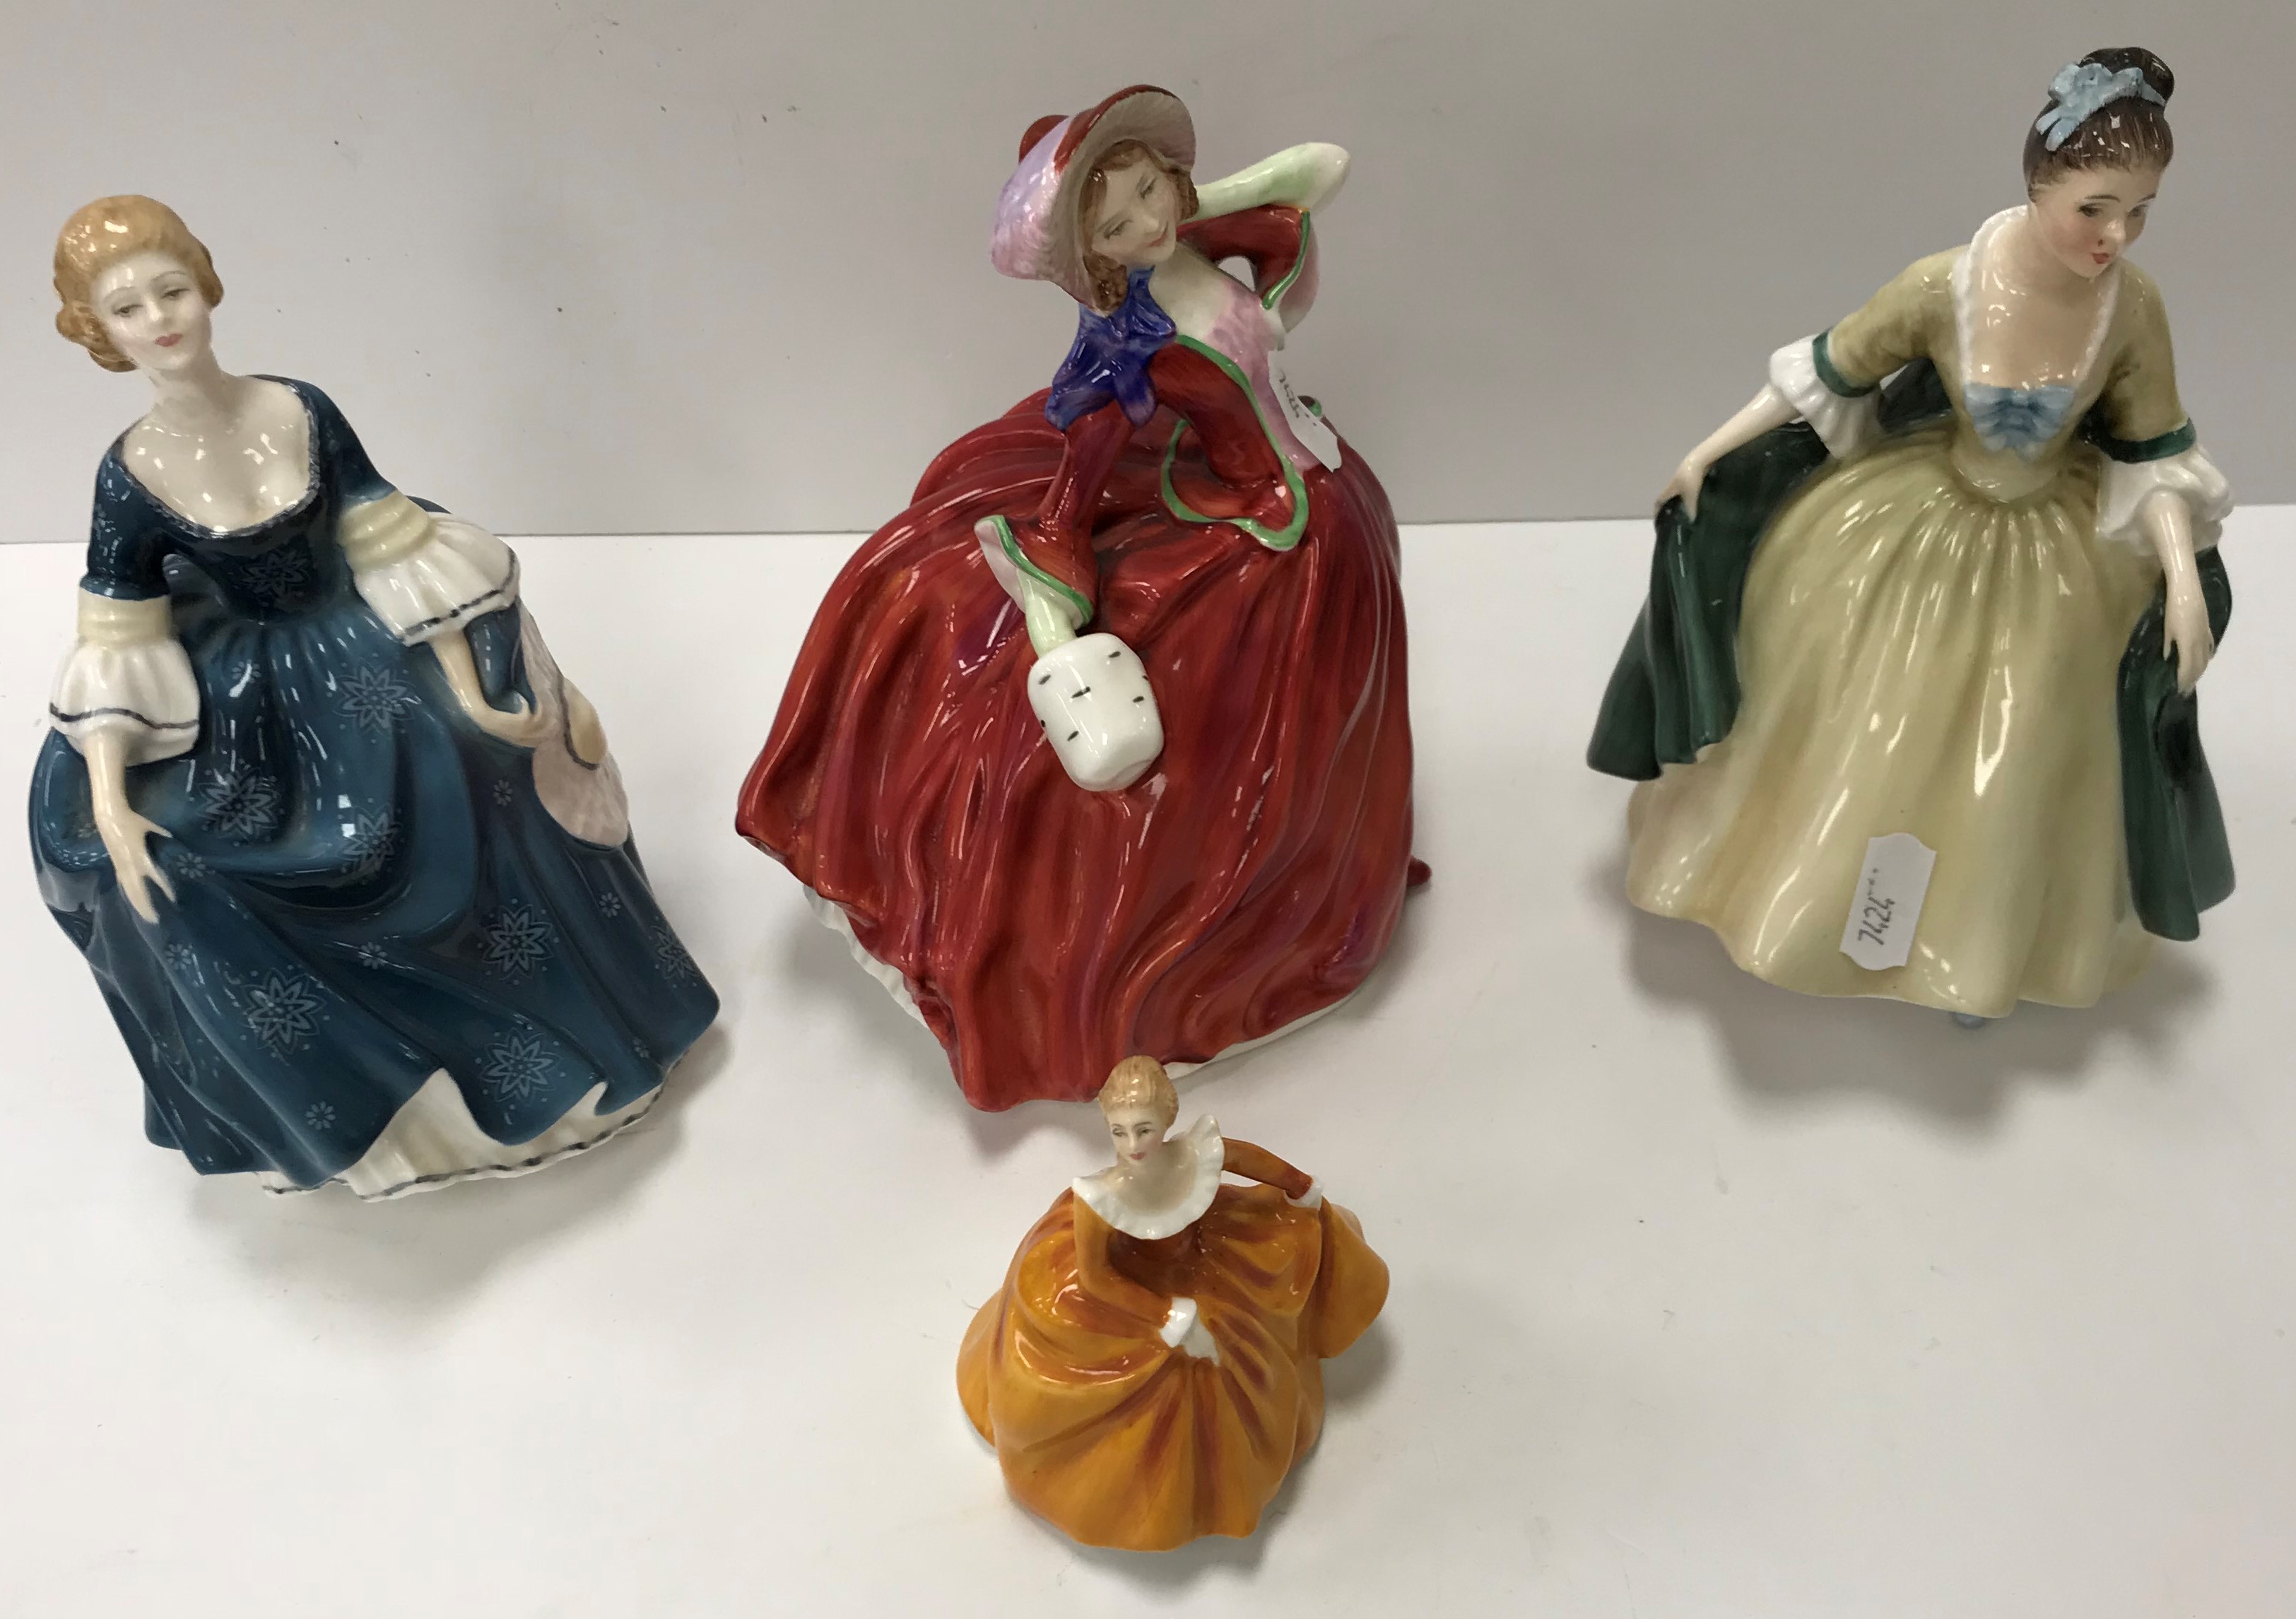 A collection of four Royal Doulton figurines including "Fragrance" (HN3220 - 1965) by Peggy Davies,